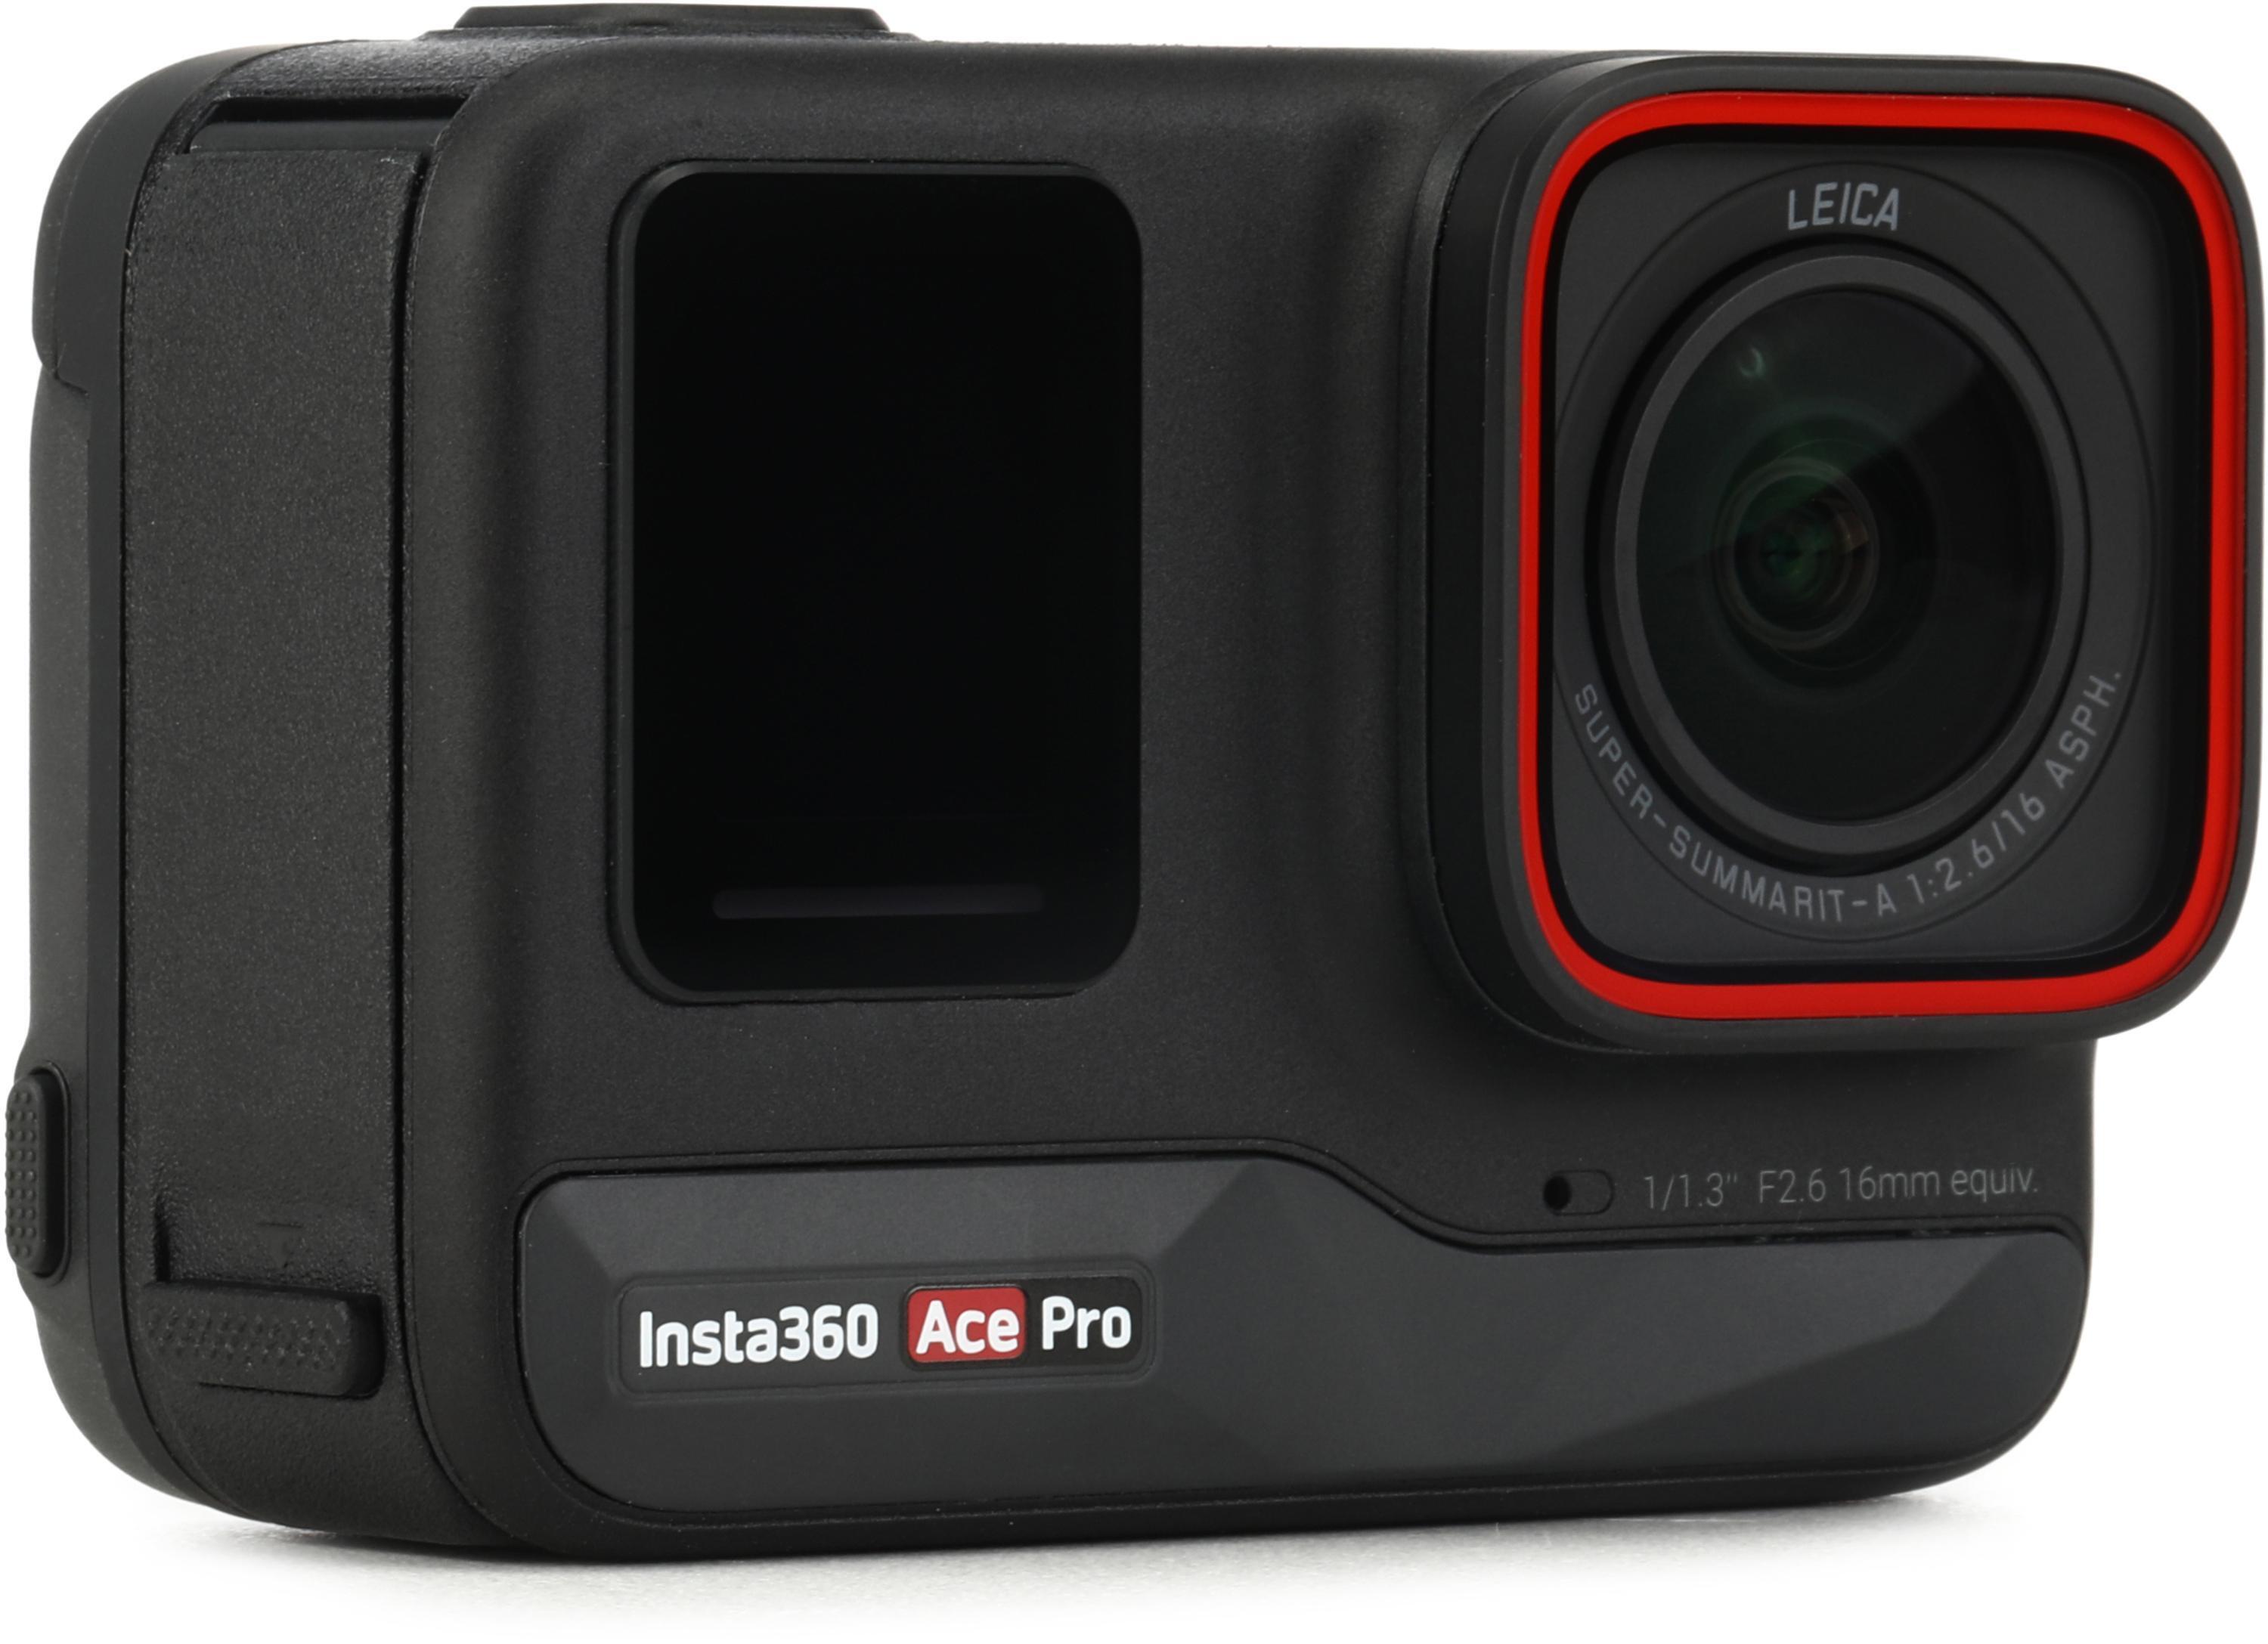 Insta360 Ace Pro Review